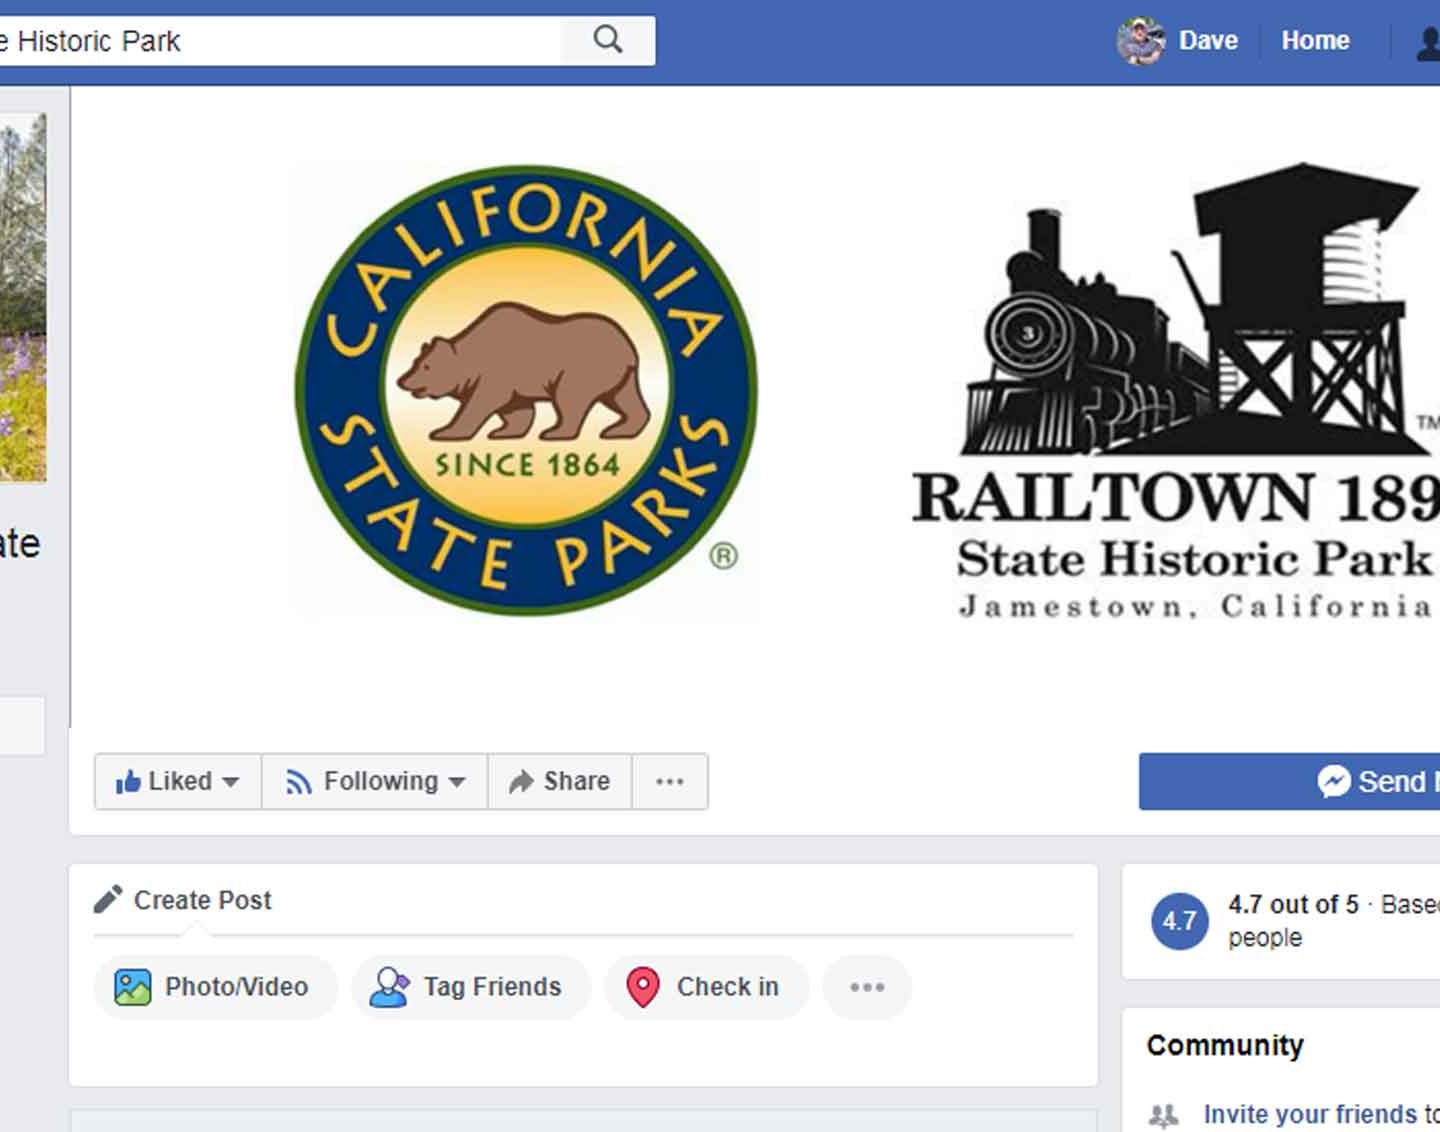 Help fix the Facebook page for Railtown 1897 State Historic Park!